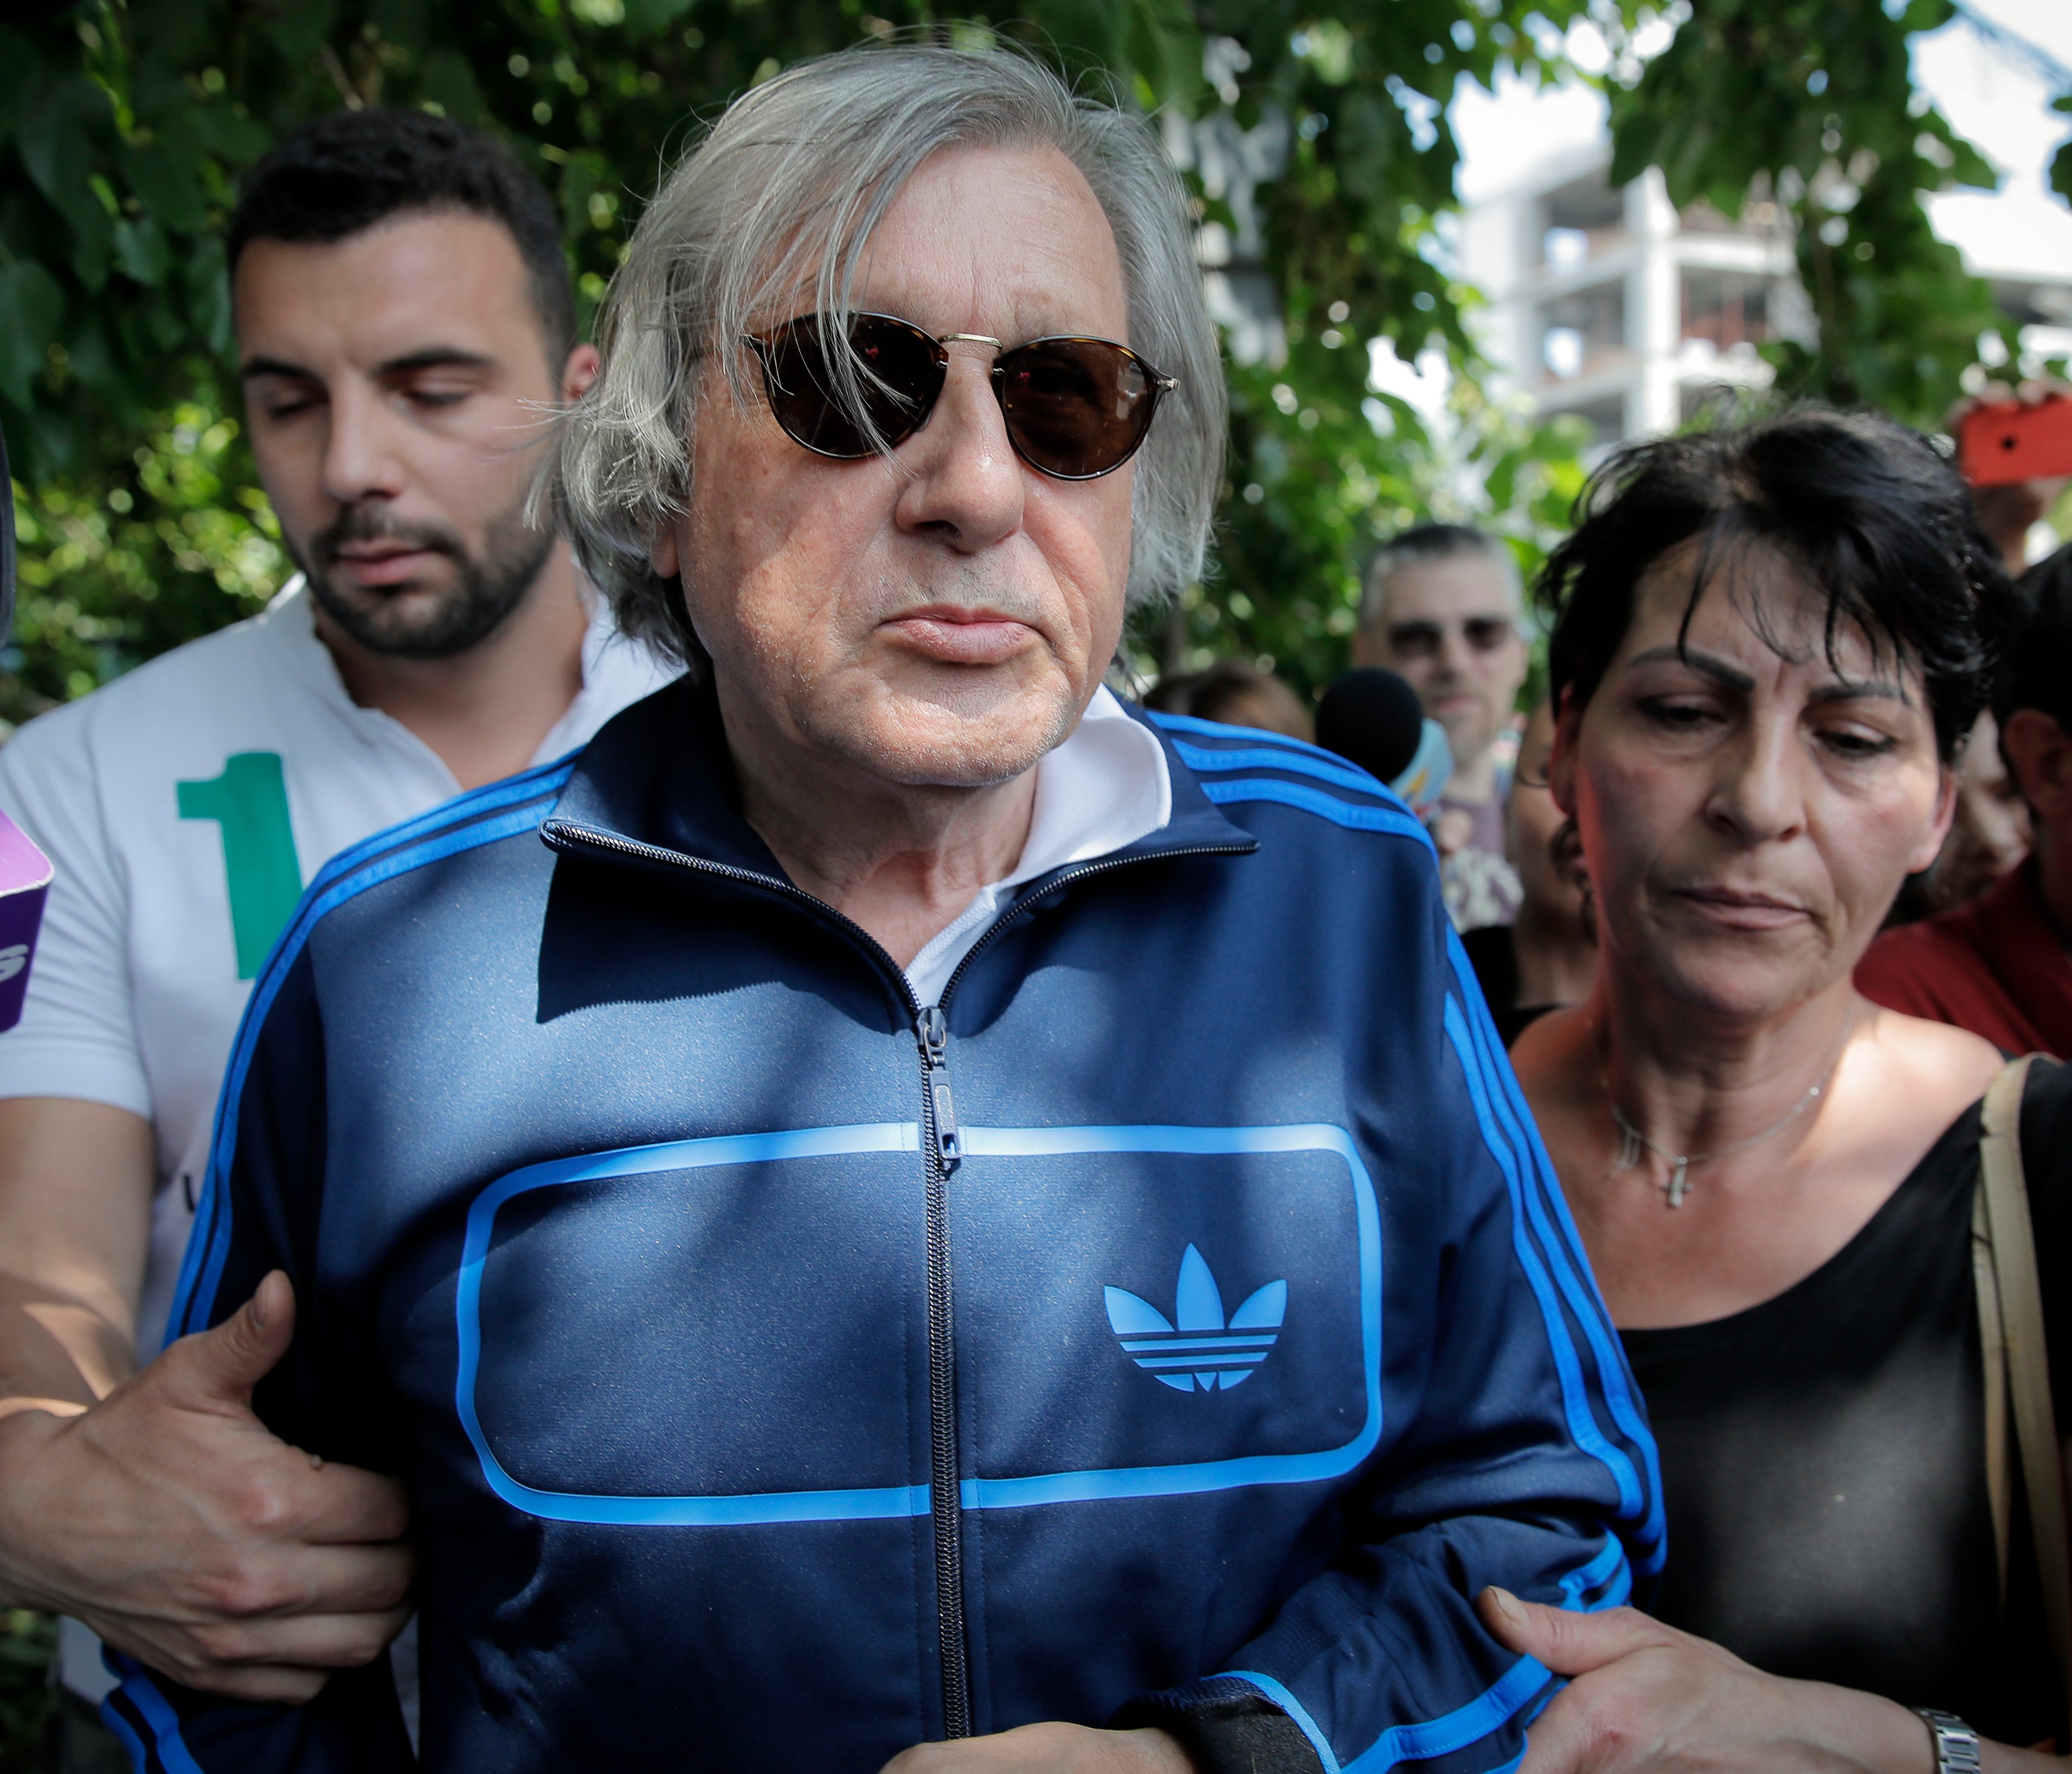 Former tennis player Ilie Nastase is released from police headquarters in Bucharest, Romania, following his second traffic arrest within hours.